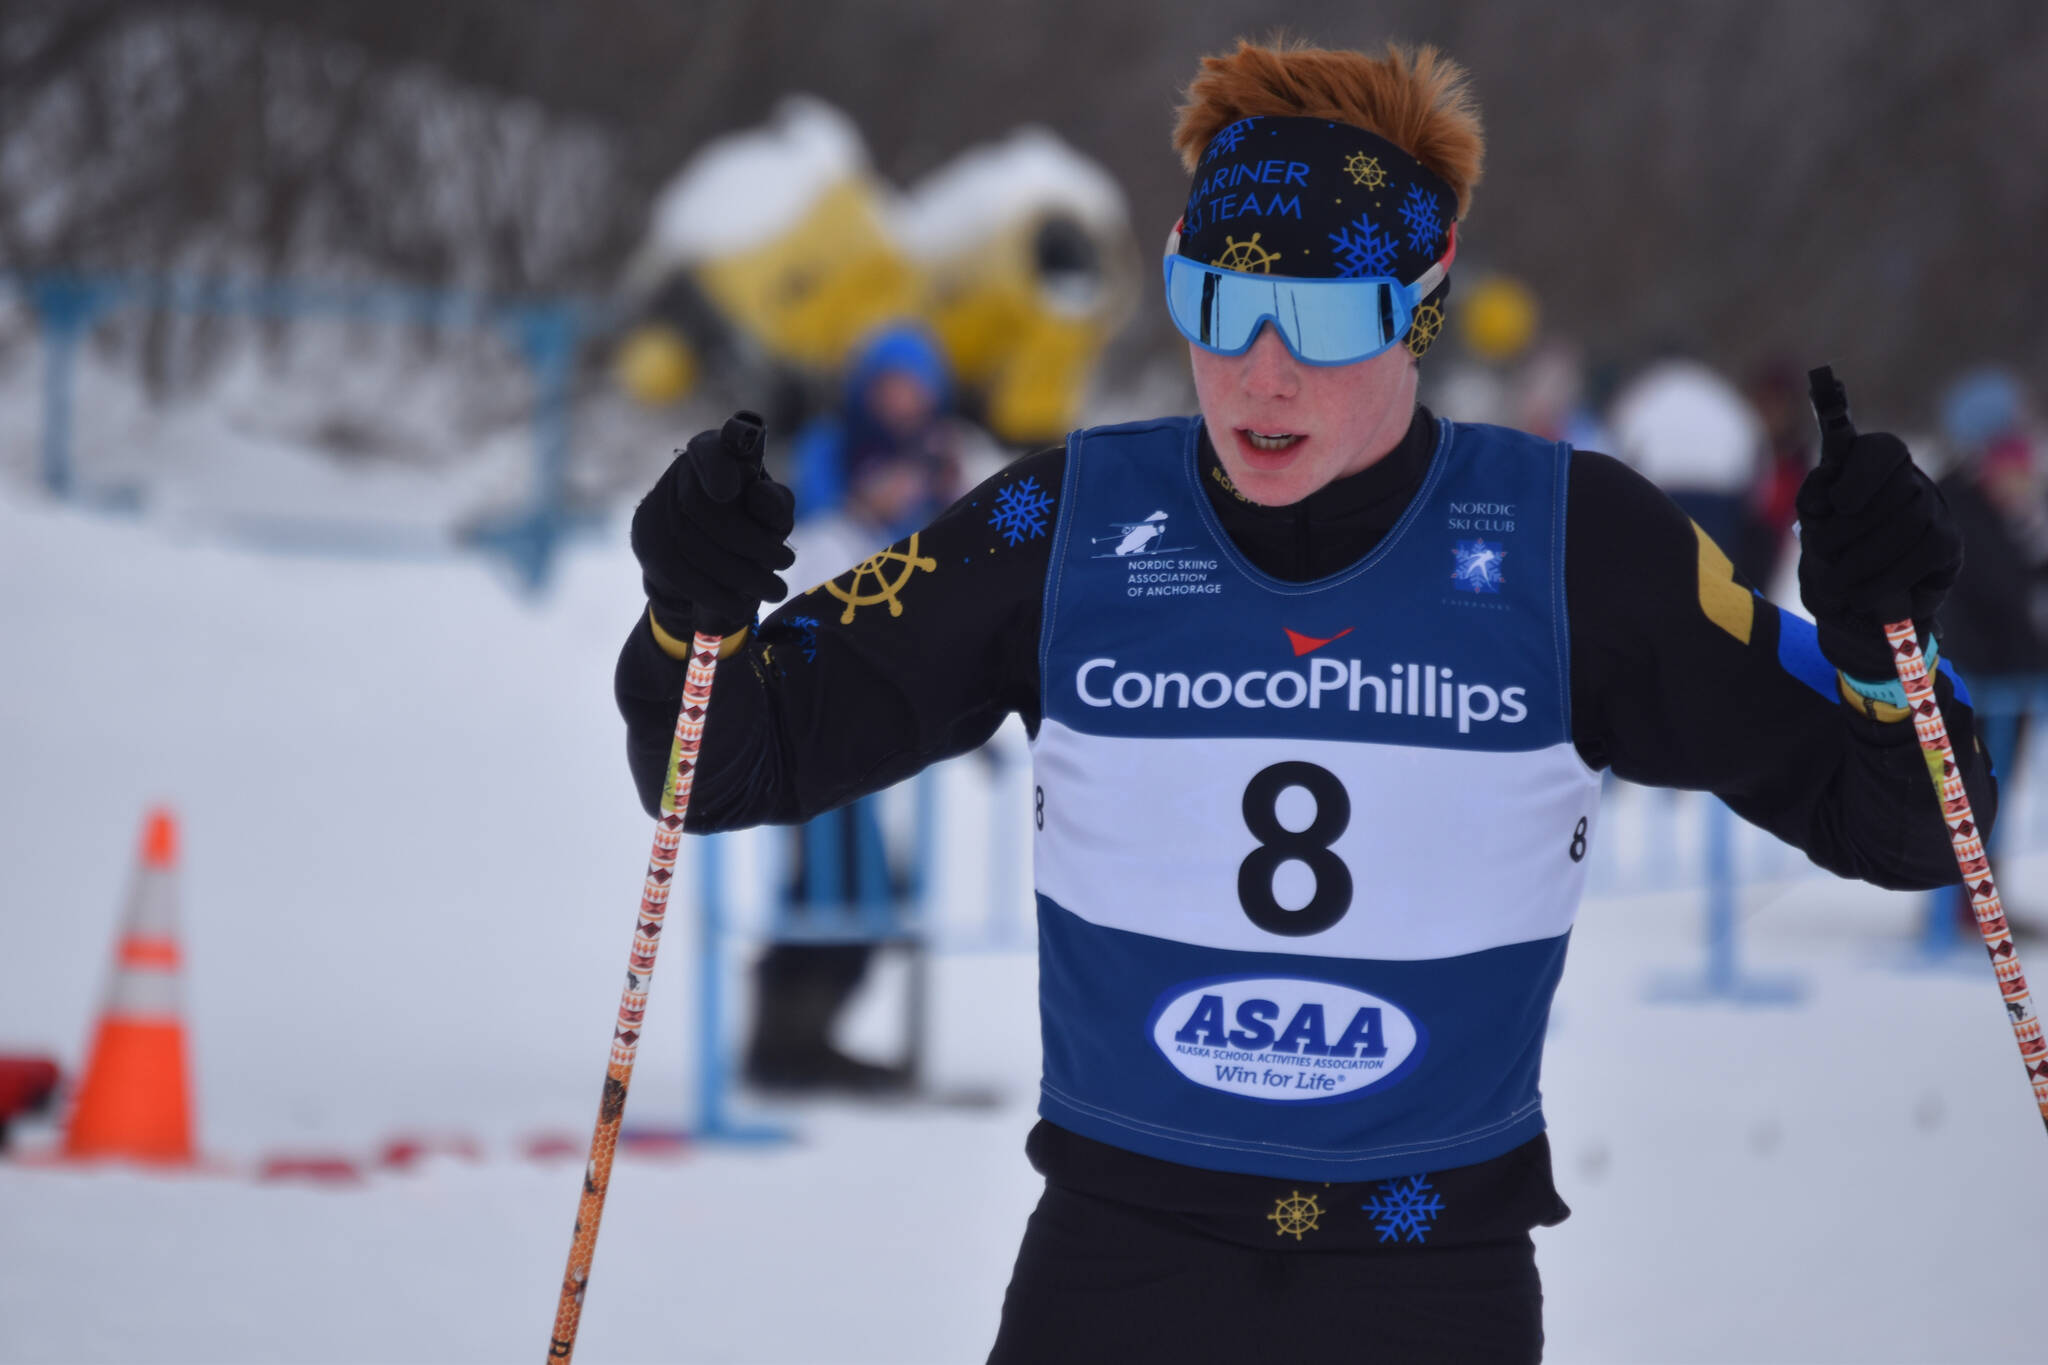 Jody Goodrich puts his sticks down in the snow as he slows to a stop in the finish chute after the final leg of the boys 4x5-kilometer relay at the ASAA State Nordic Ski Championships at Kincaid Park in Anchorage, Alaska, on Saturday, Feb. 25, 2023. (Jake Dye/Peninsula Clarion)